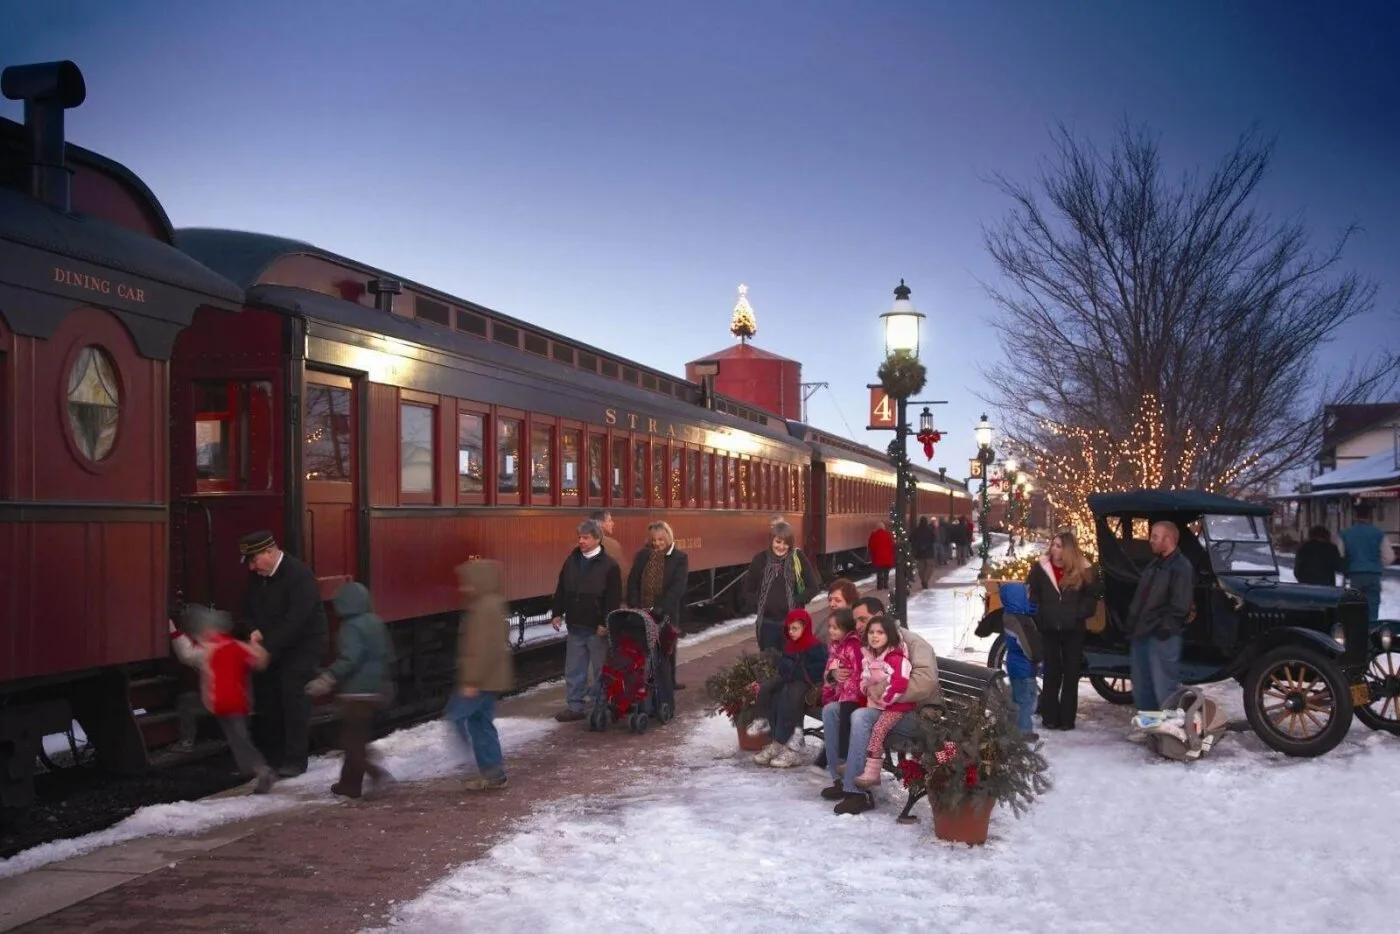 All aboard: 7 enchanting Pennsylvania train rides for a cozy holiday experience